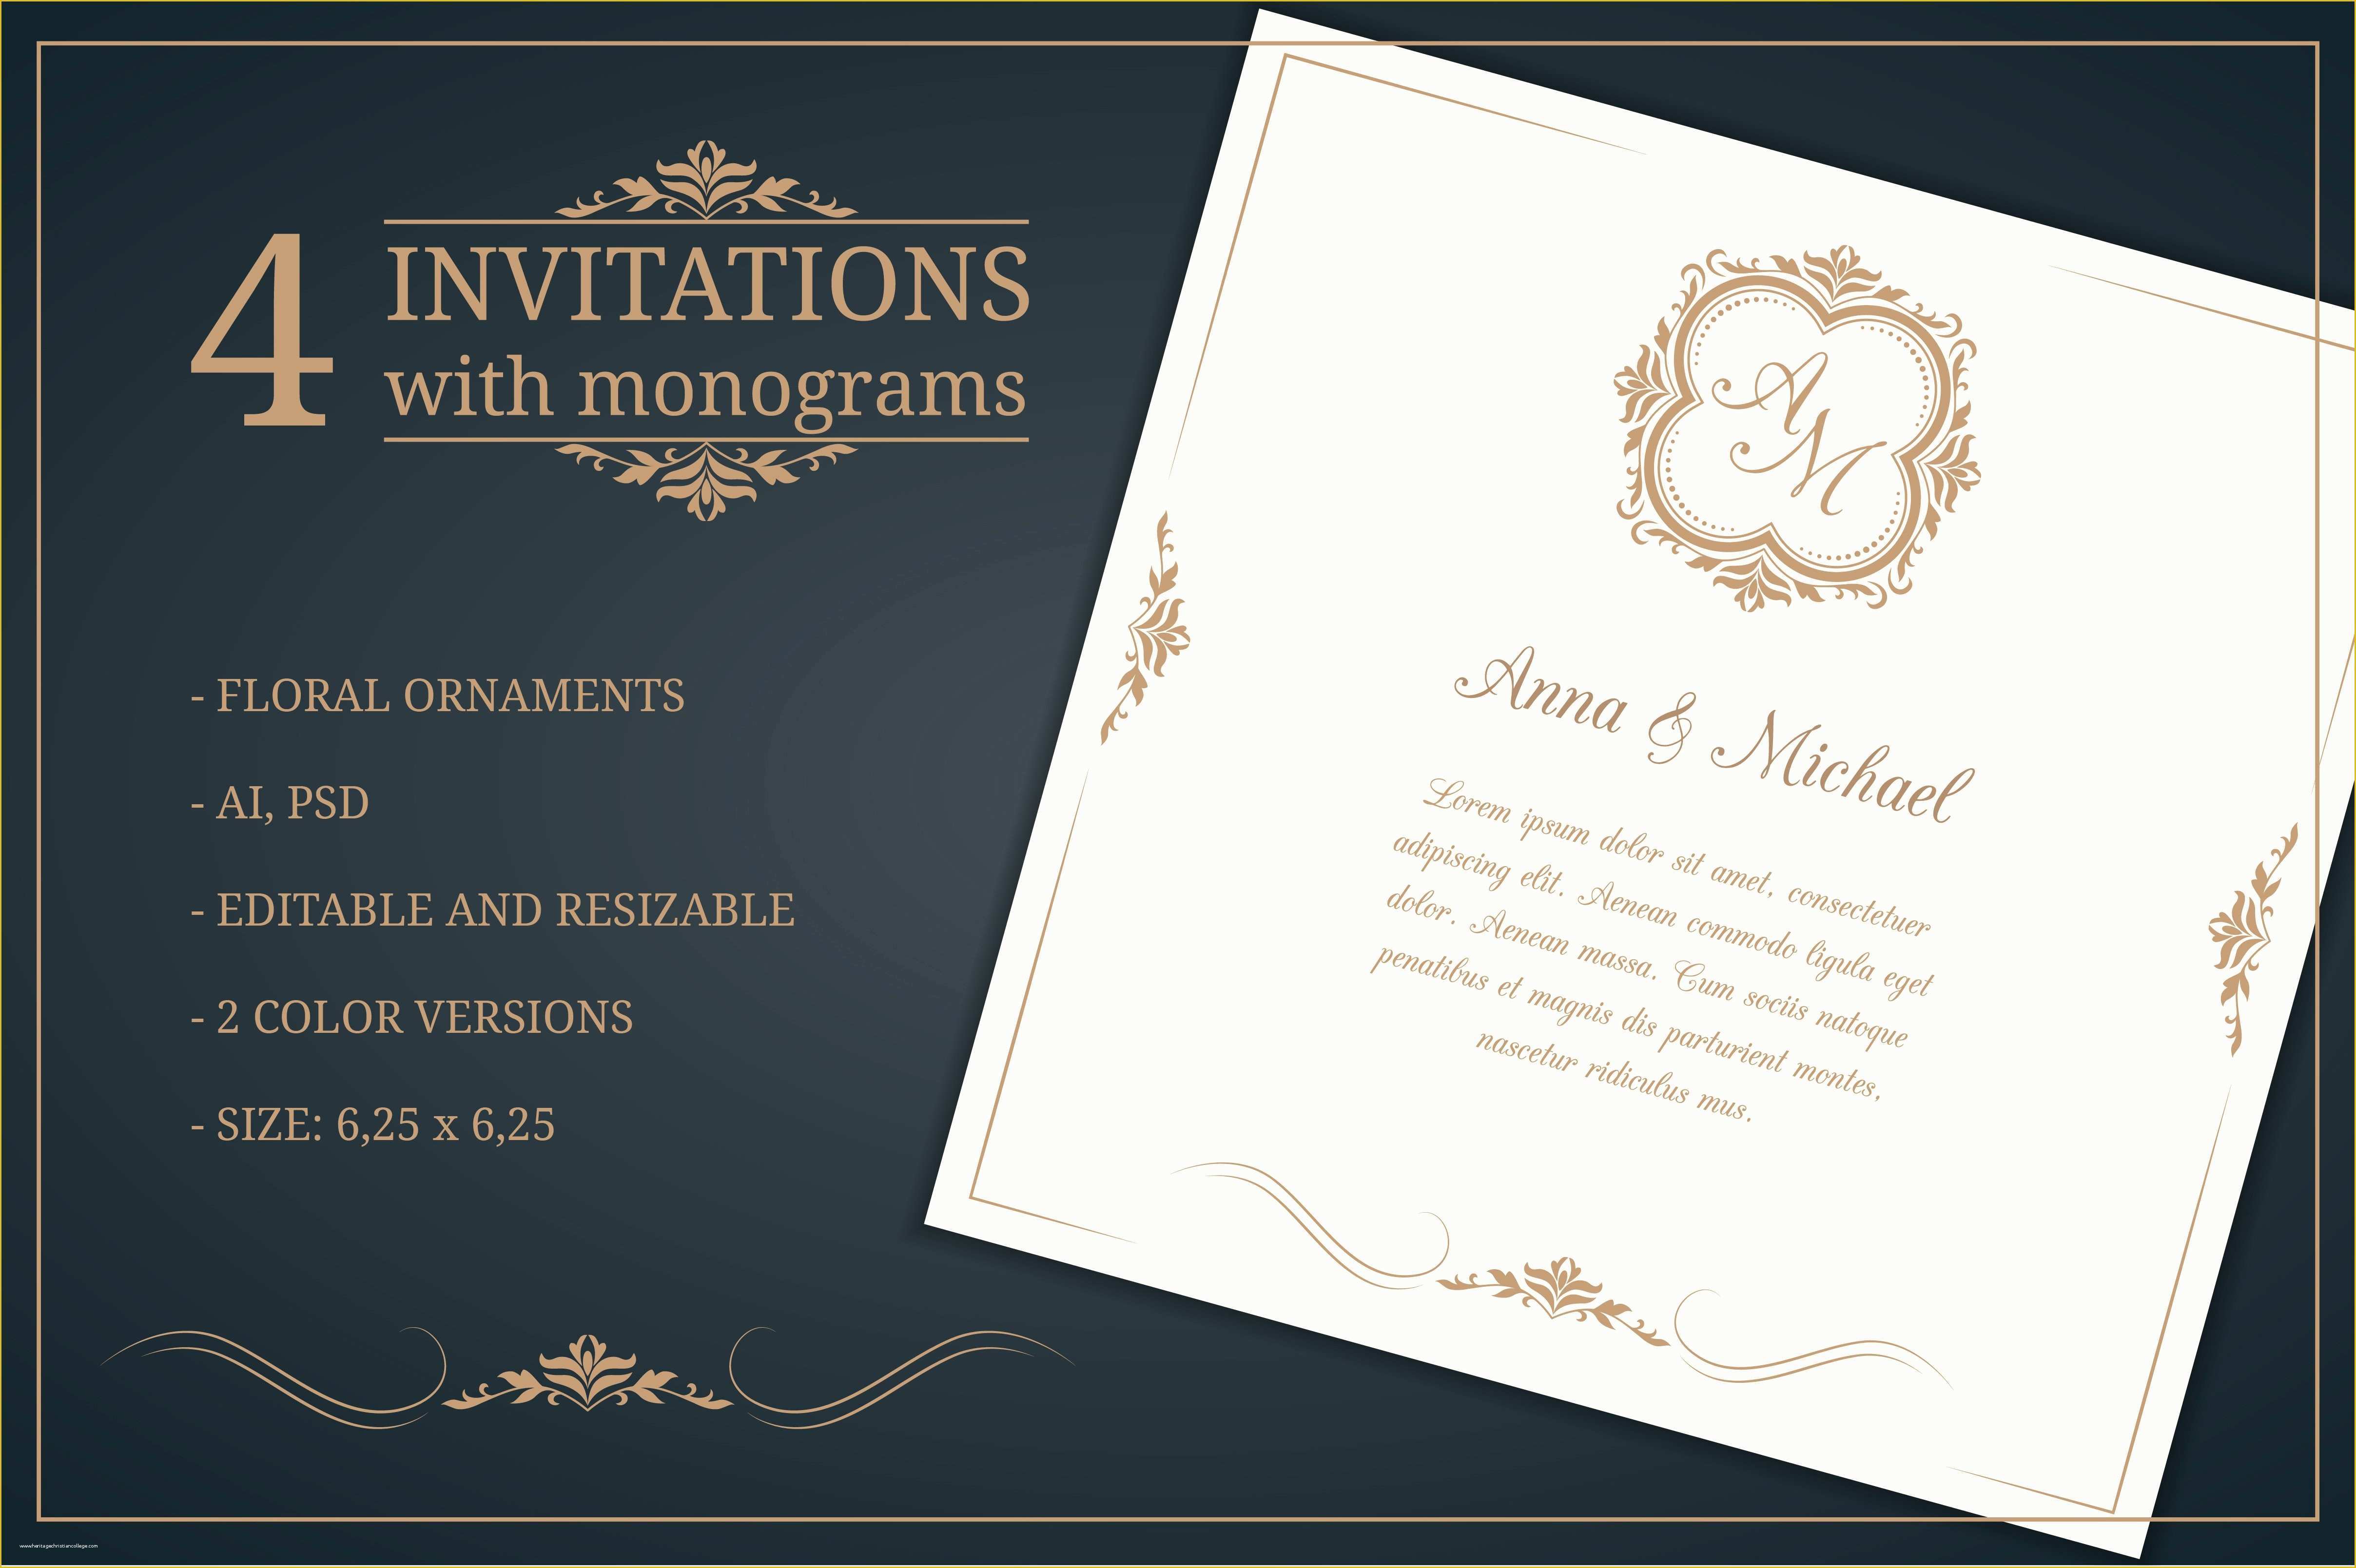 Free Wedding Announcement Templates Download Of Wedding Invitations with Monograms Wedding Templates